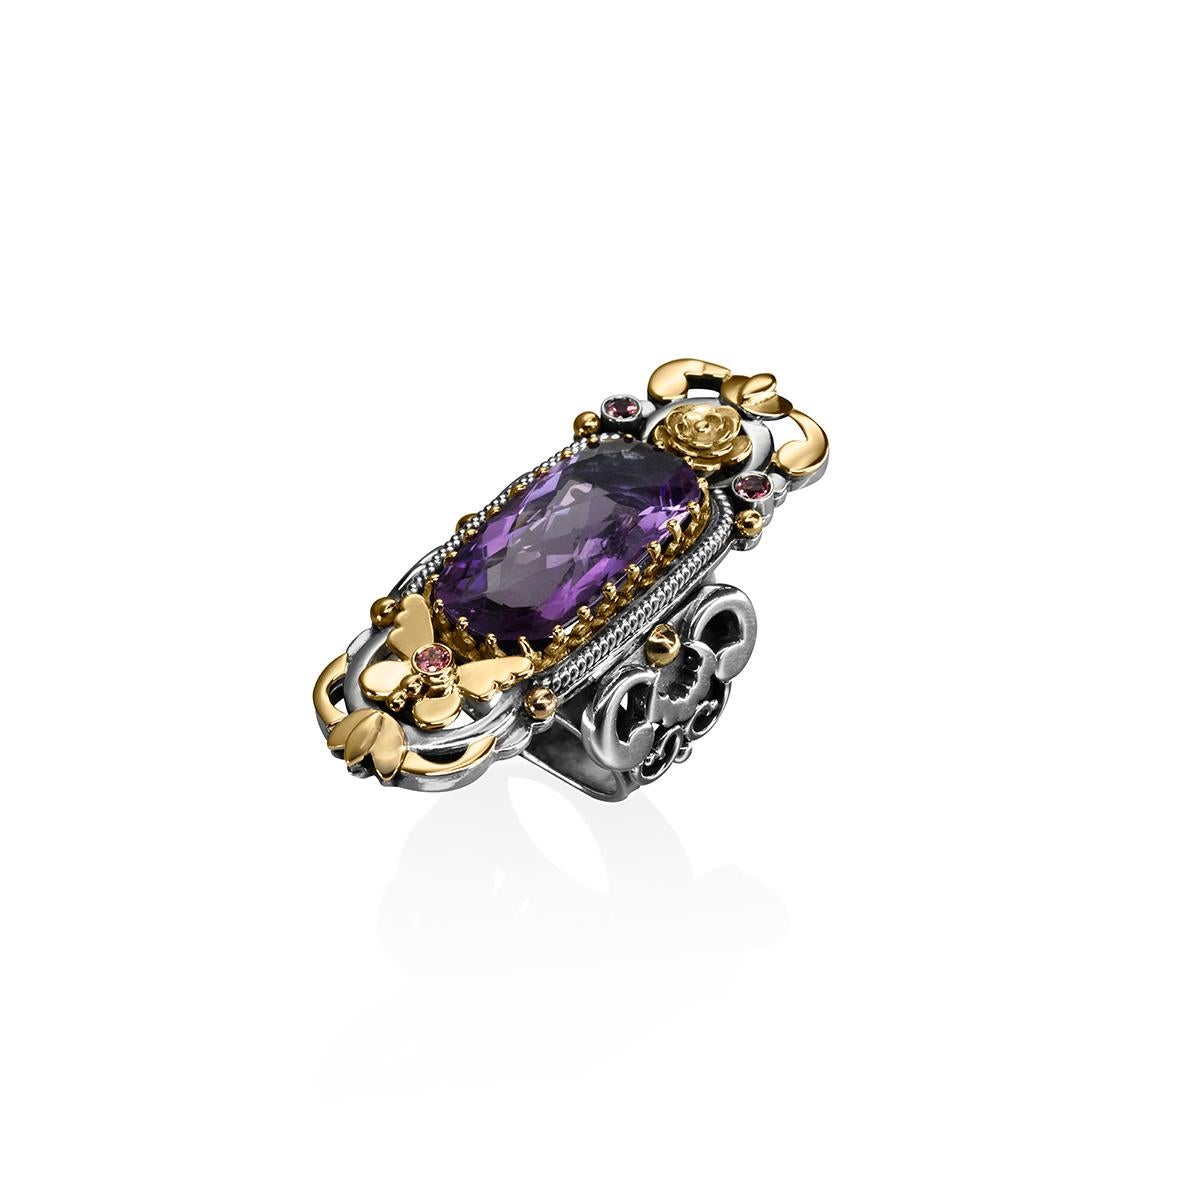 For Sale:  18 Karat Gold, Sterling Silver, Amethyst and Pink Tourmaline Limited Garden Ring 7